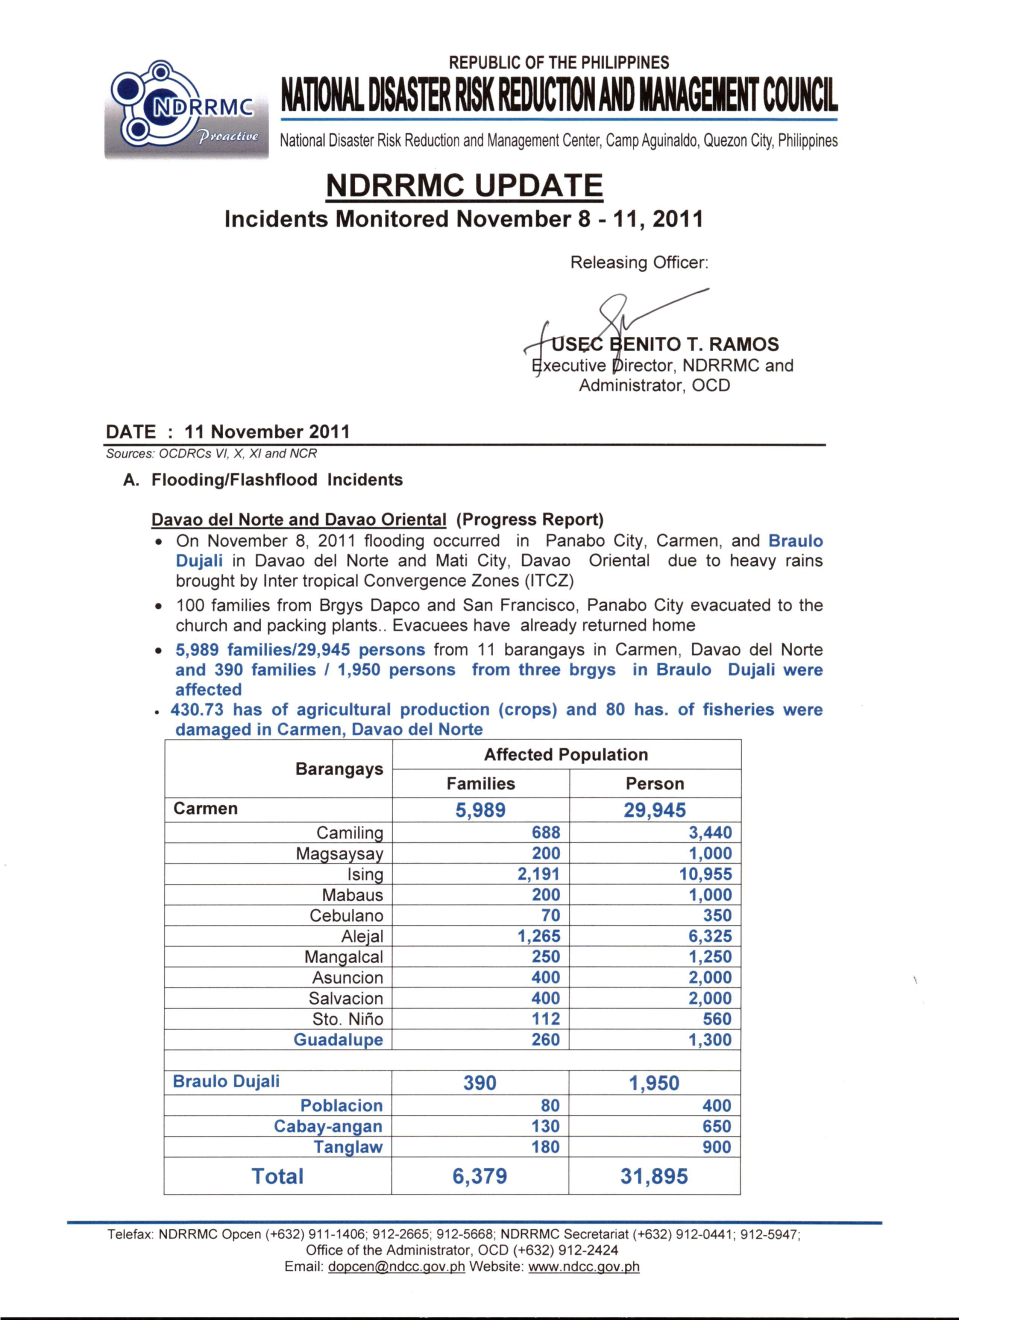 NDRRMC Updare Re Incidents Monitored on 11 November 2011